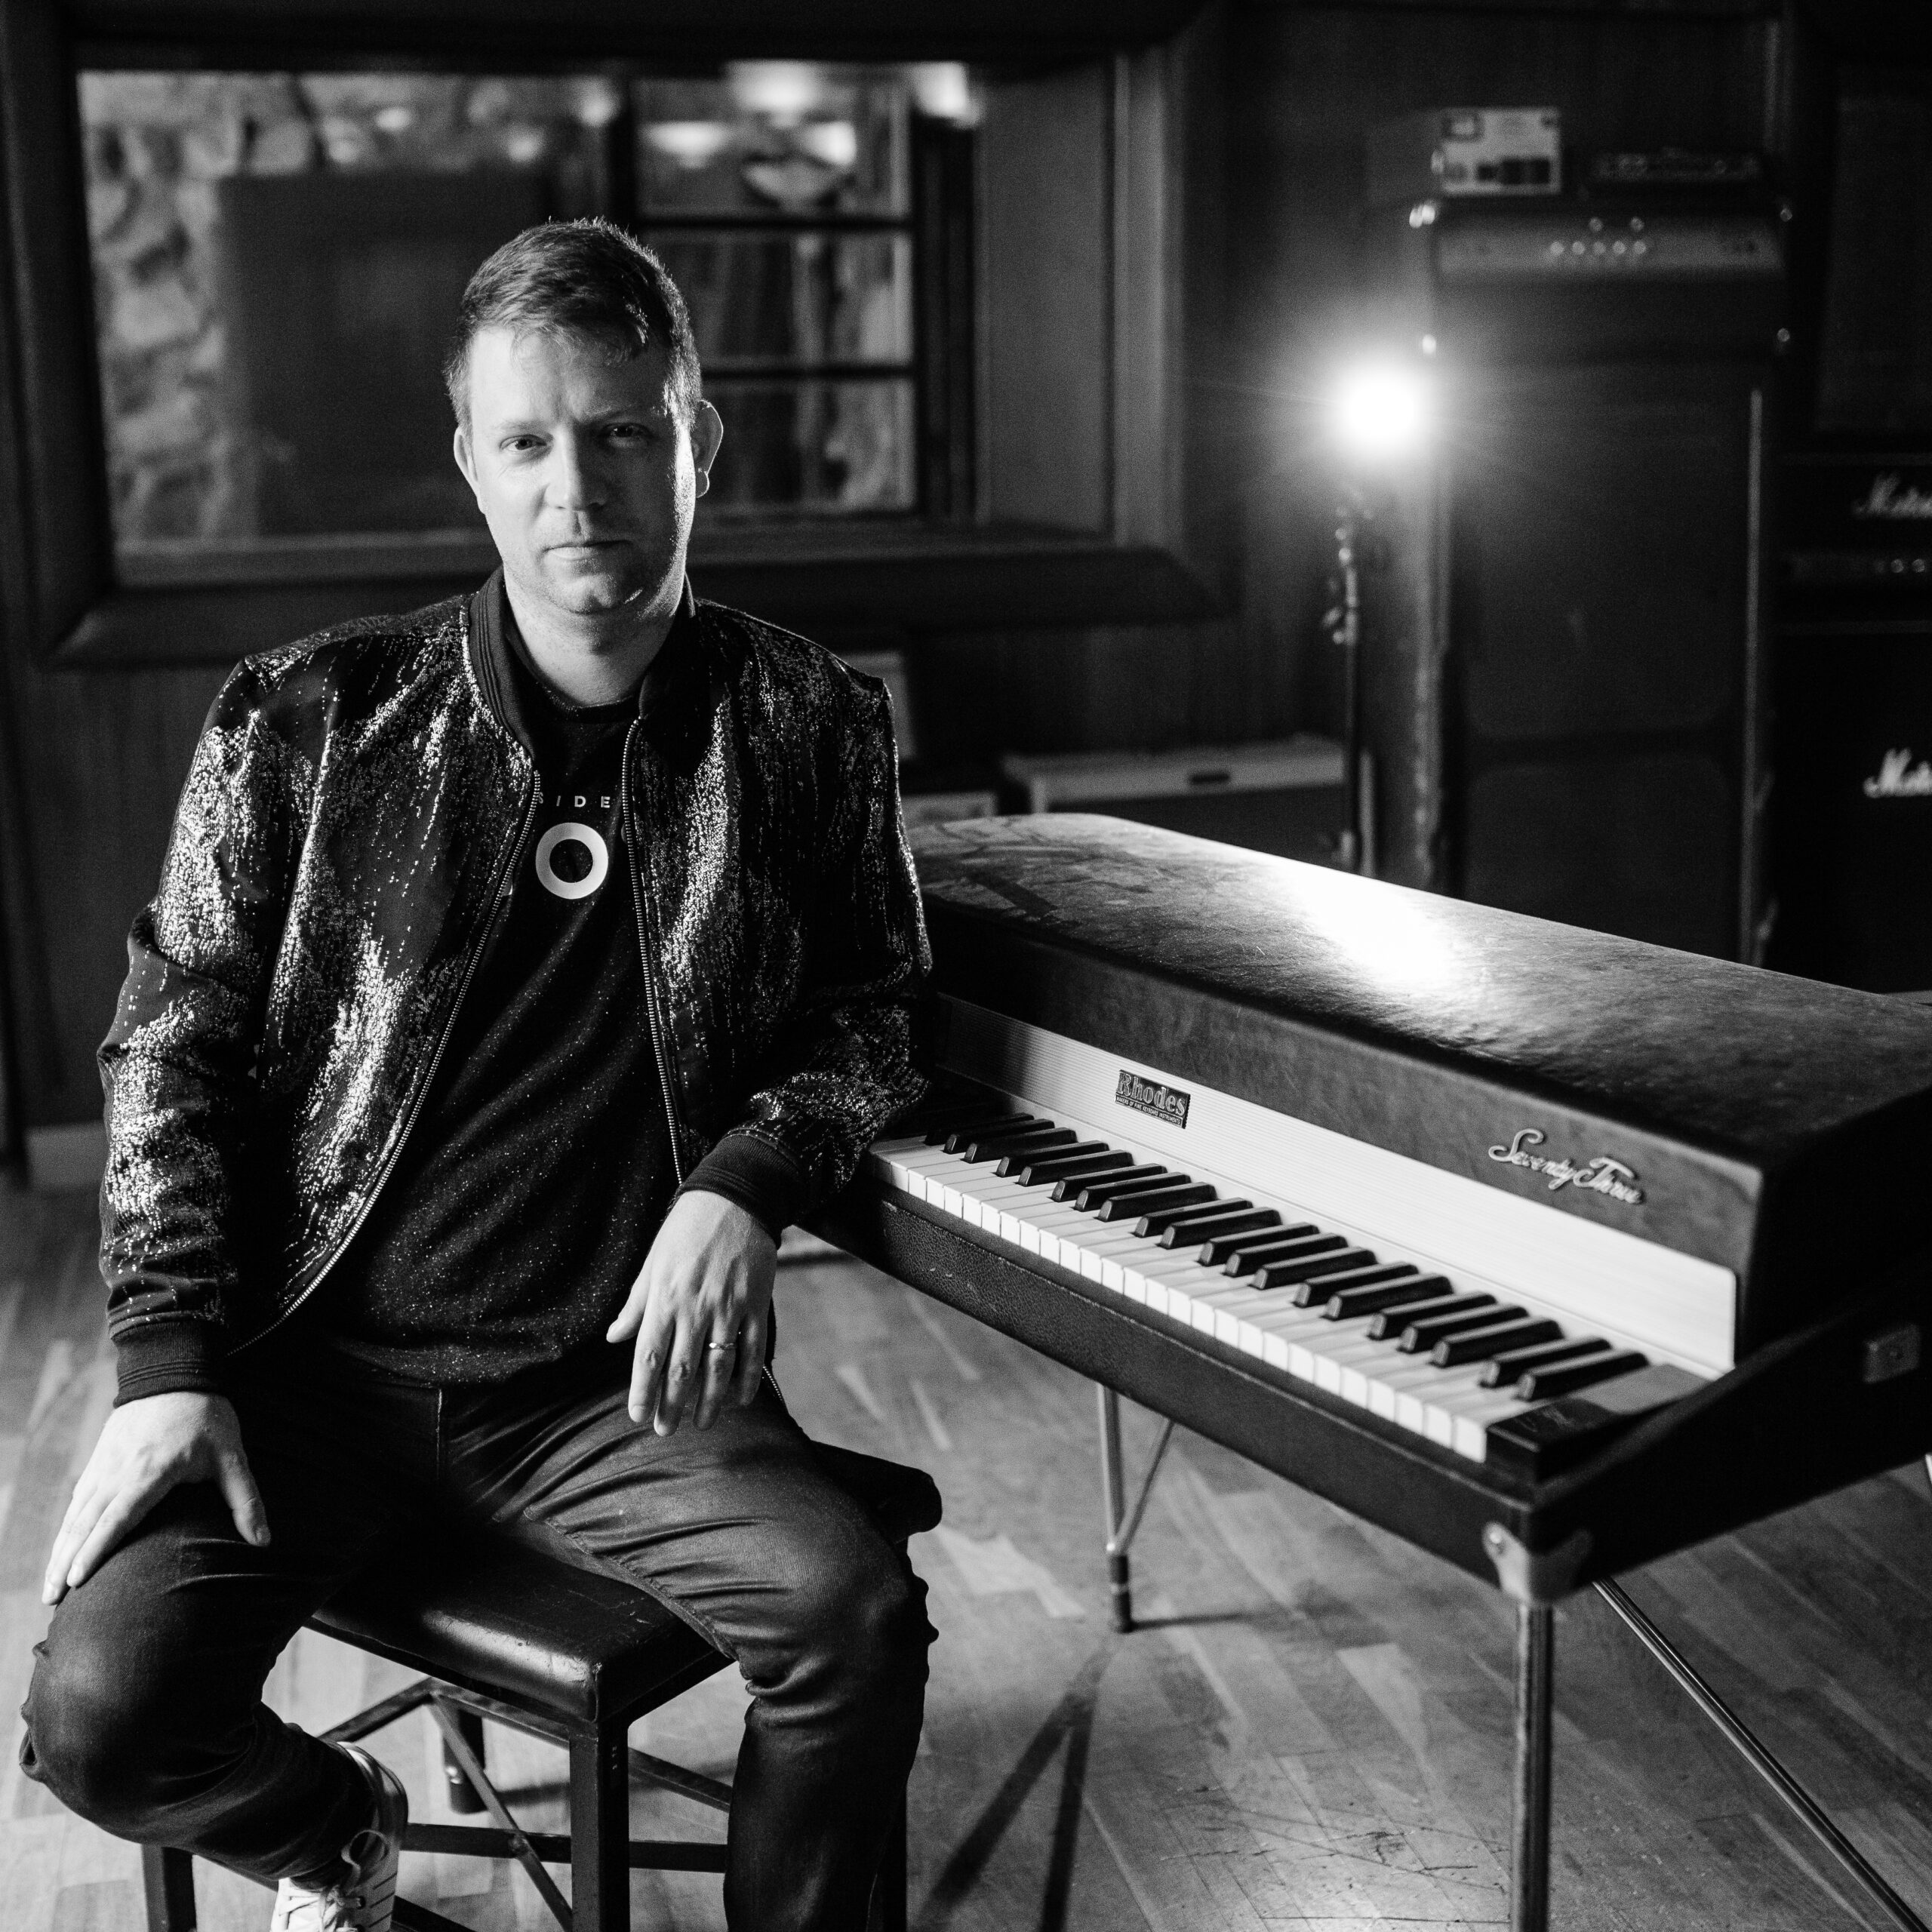 On the Rhodes again promoshoot